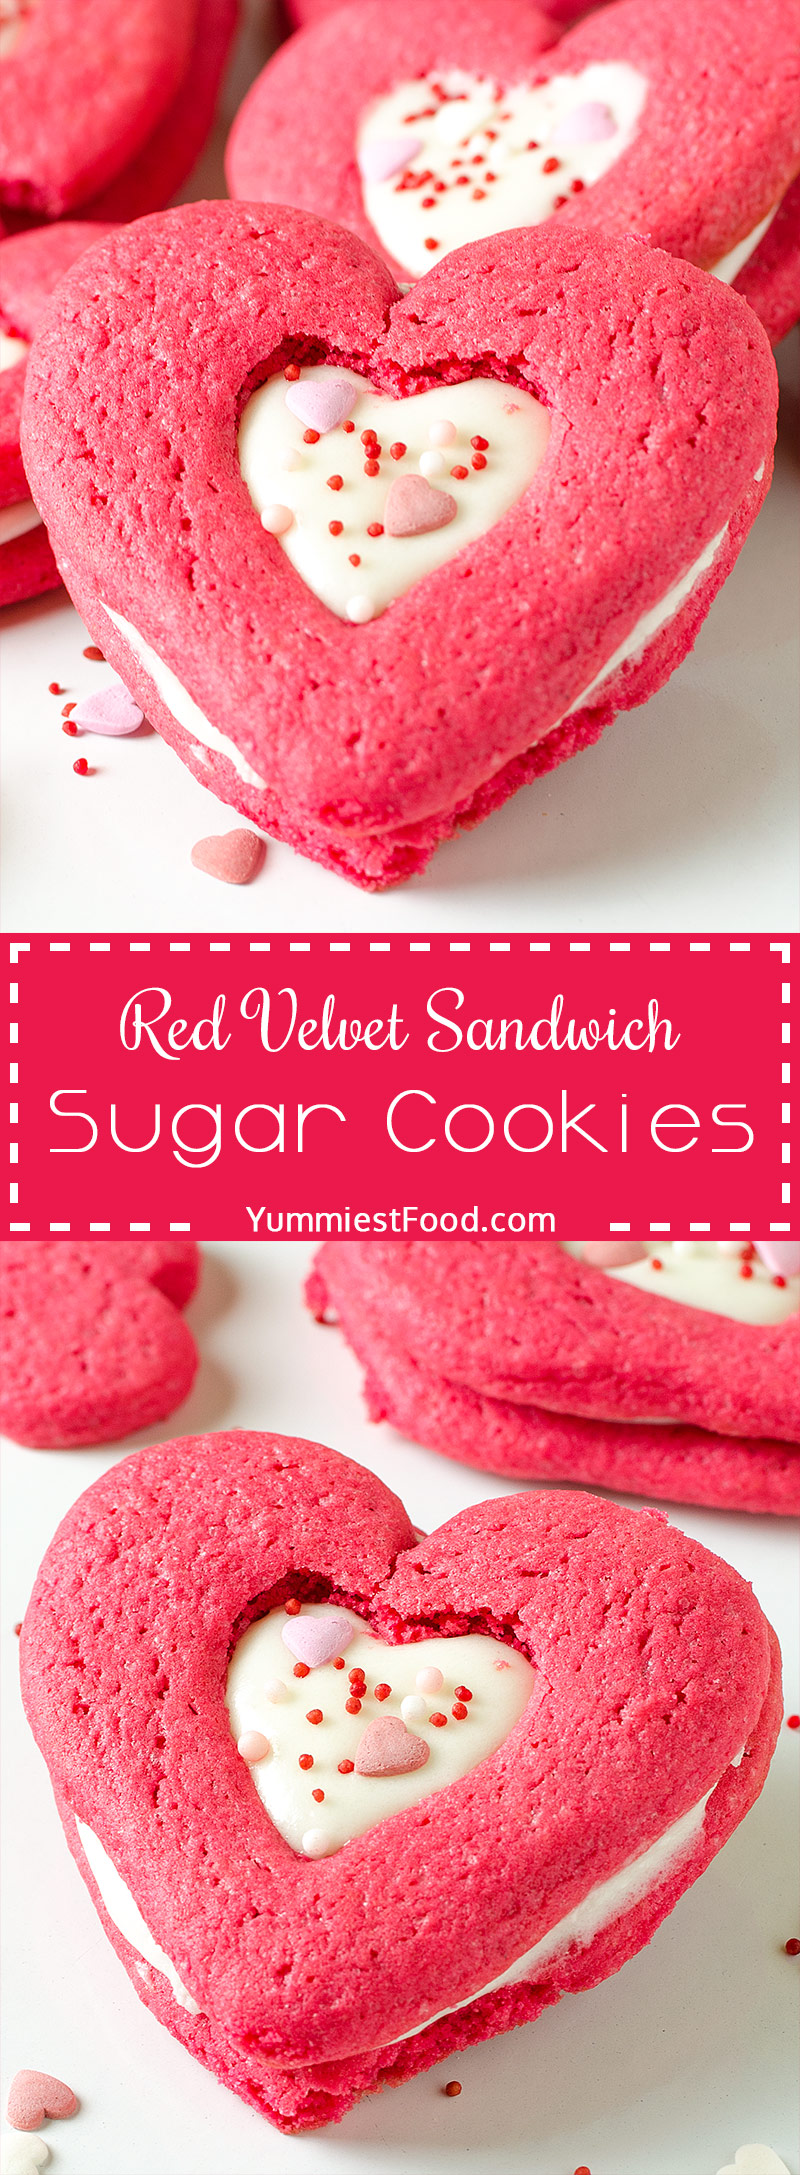 VALENTINES RED VELVET SANDWICH SUGAR COOKIES – Two red velvet sugar cookies are sandwich with cream cheese filling and topped with cute Valentines sprinkles 